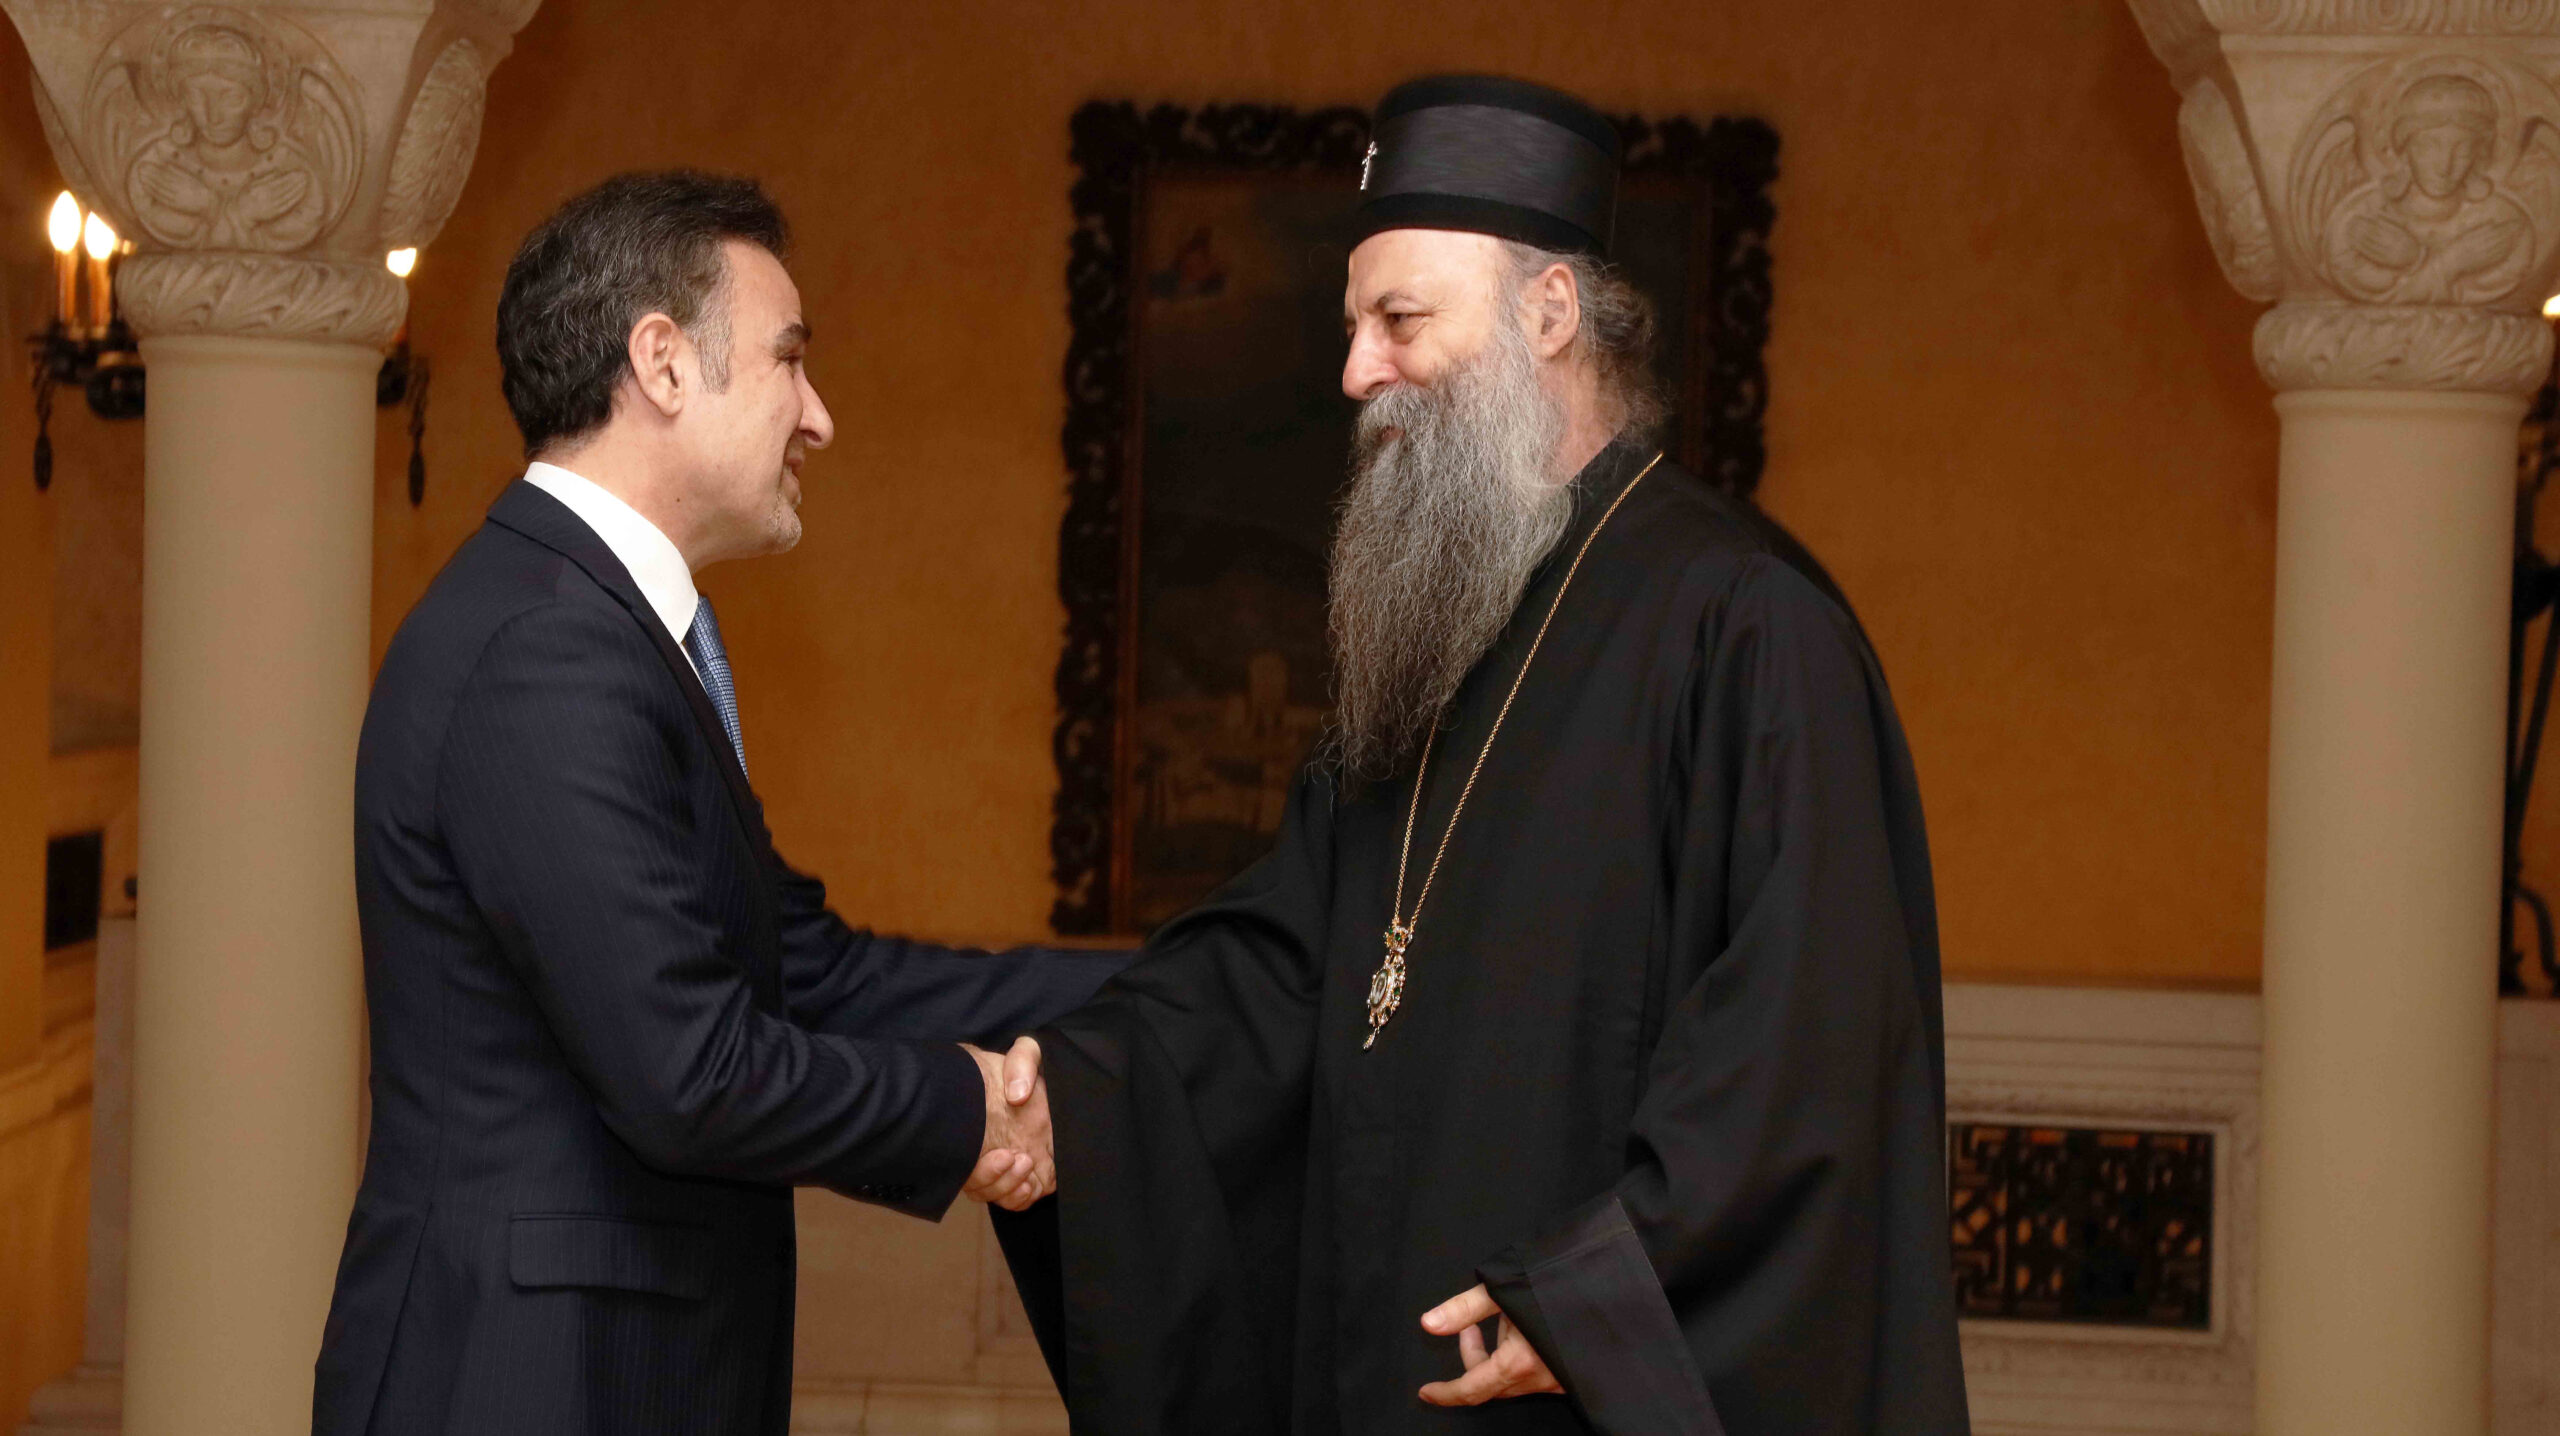 Ambassador of Syria to Serbia Thanked Serbian Orthodox Church for its Help and Aid